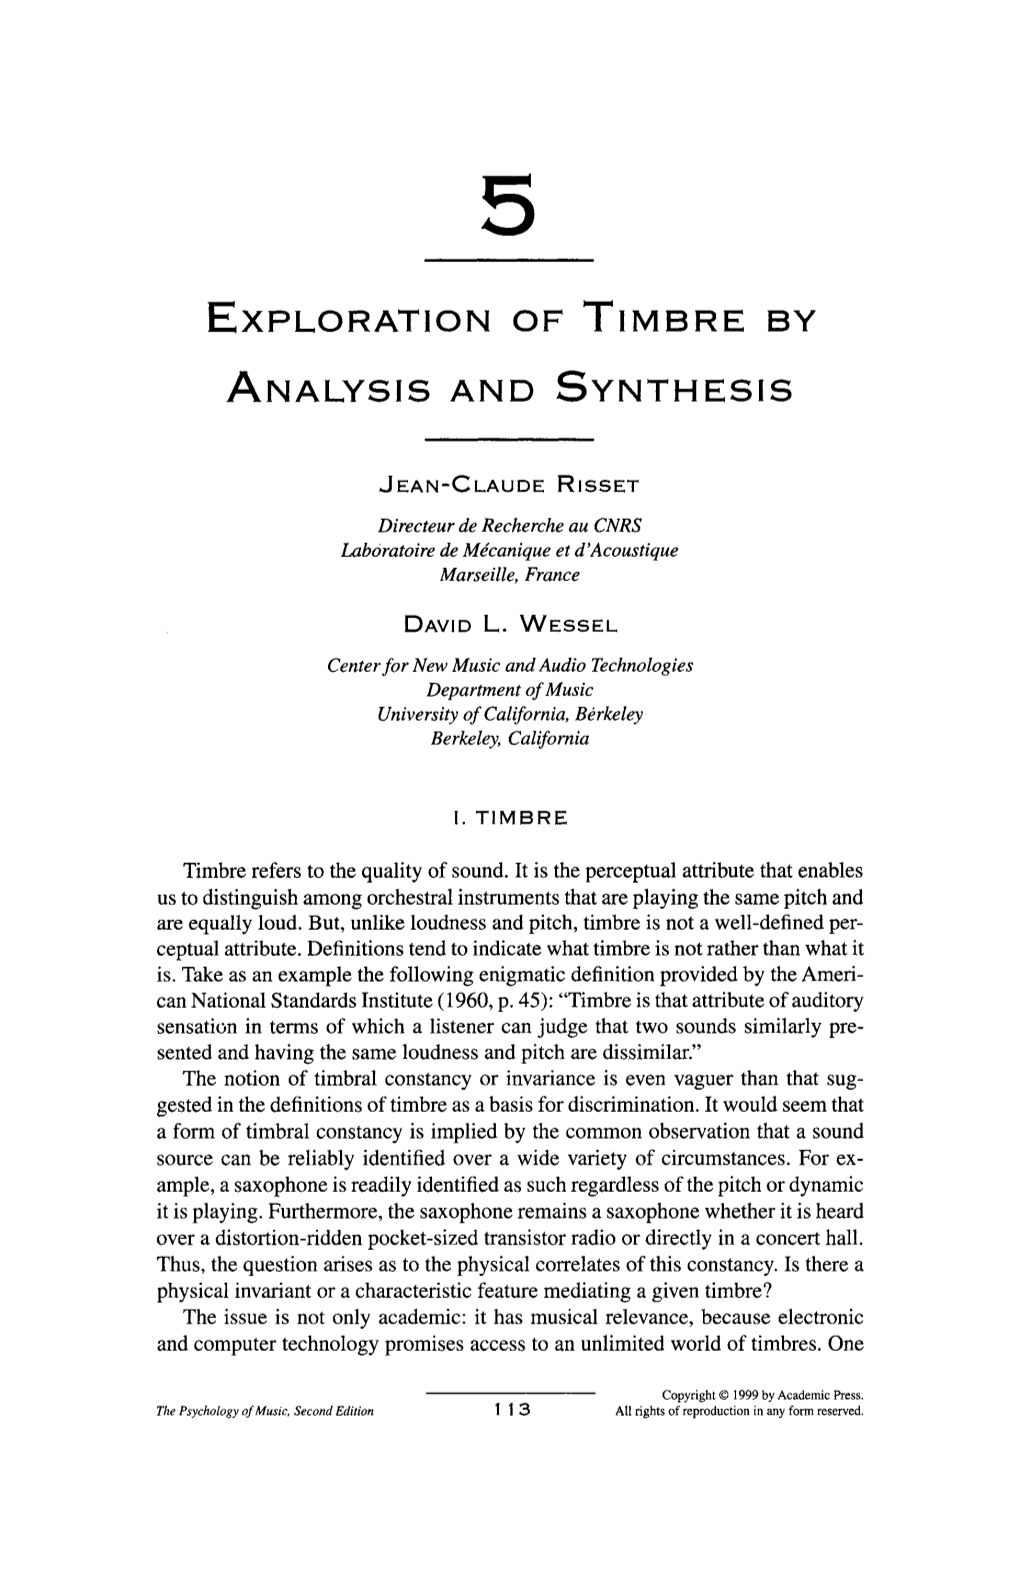 Exploration of Timbre by Analysis and Synthesis 115